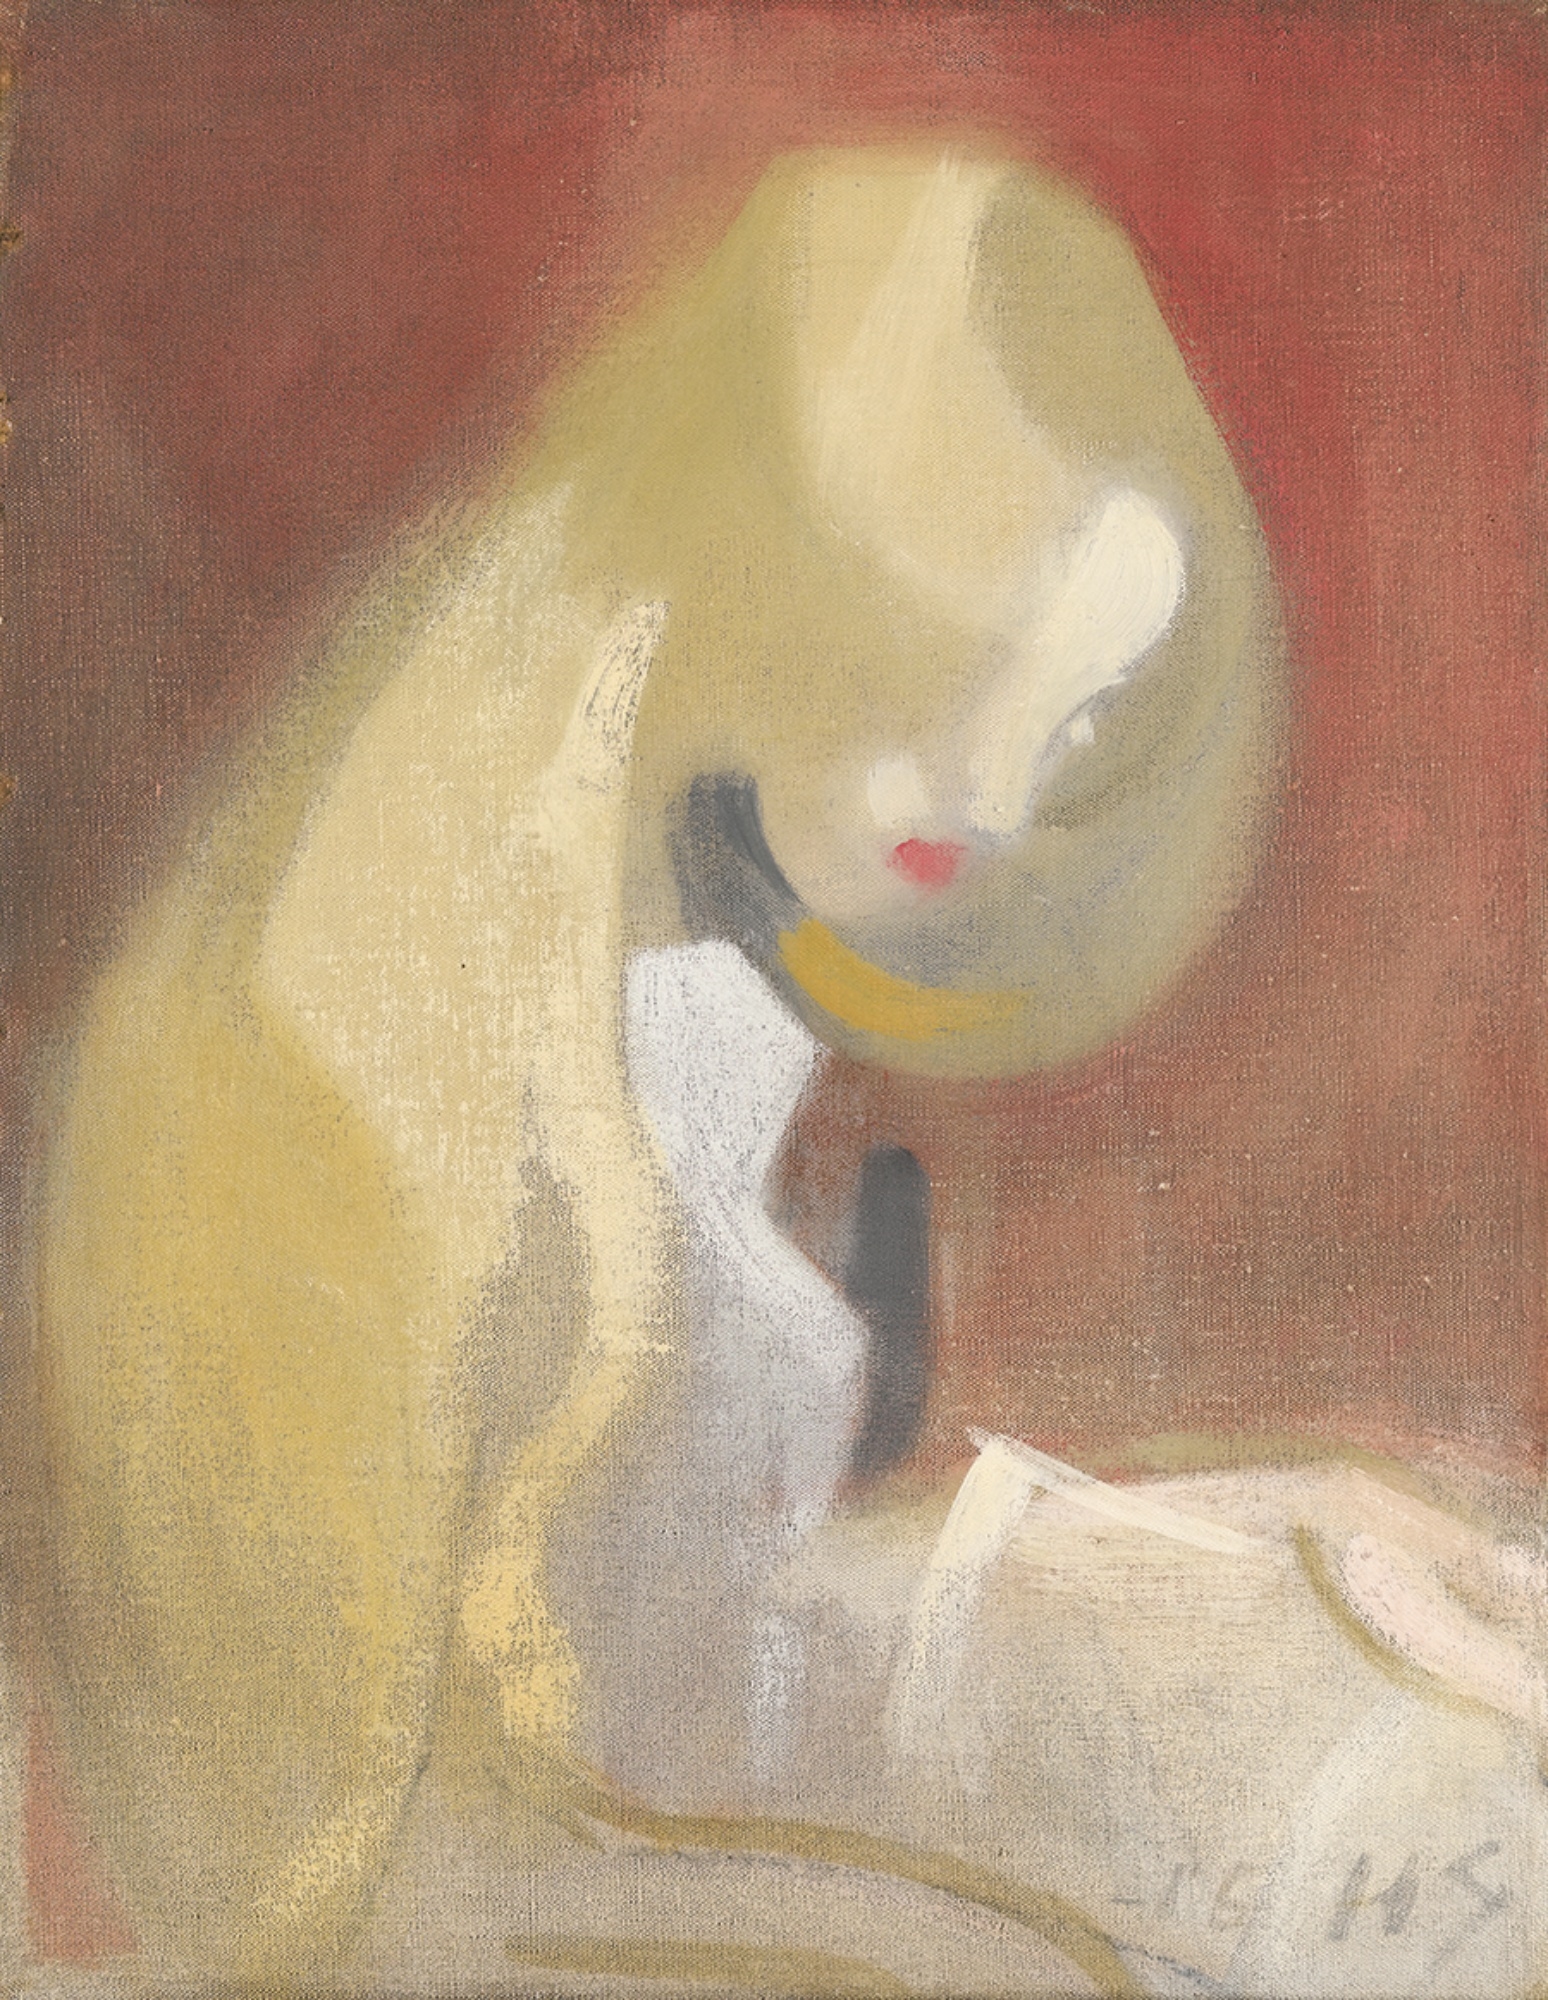 GIRL WITH BLONDE HAIR by Helene Schjerfbeck, 1916